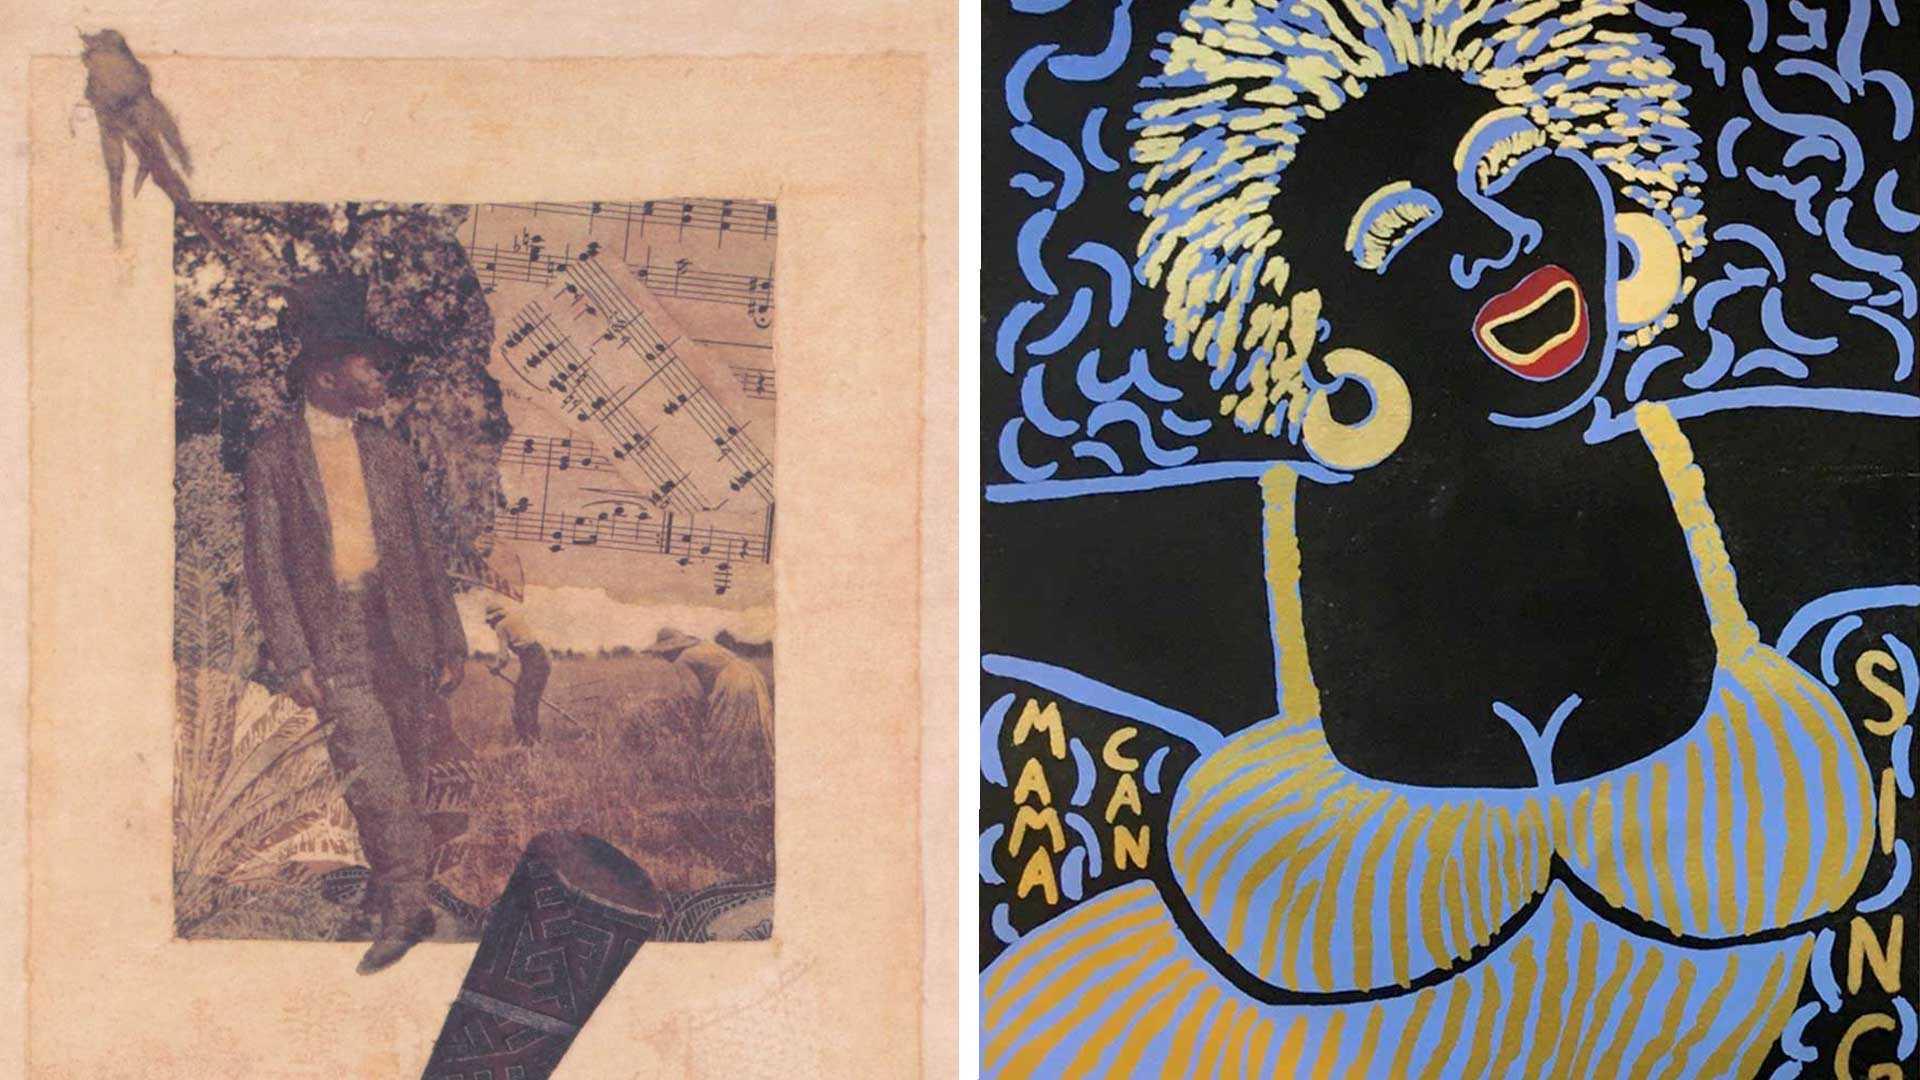 Two serigraph pieces on display at the David C. Driskell Center at the University of Maryland.